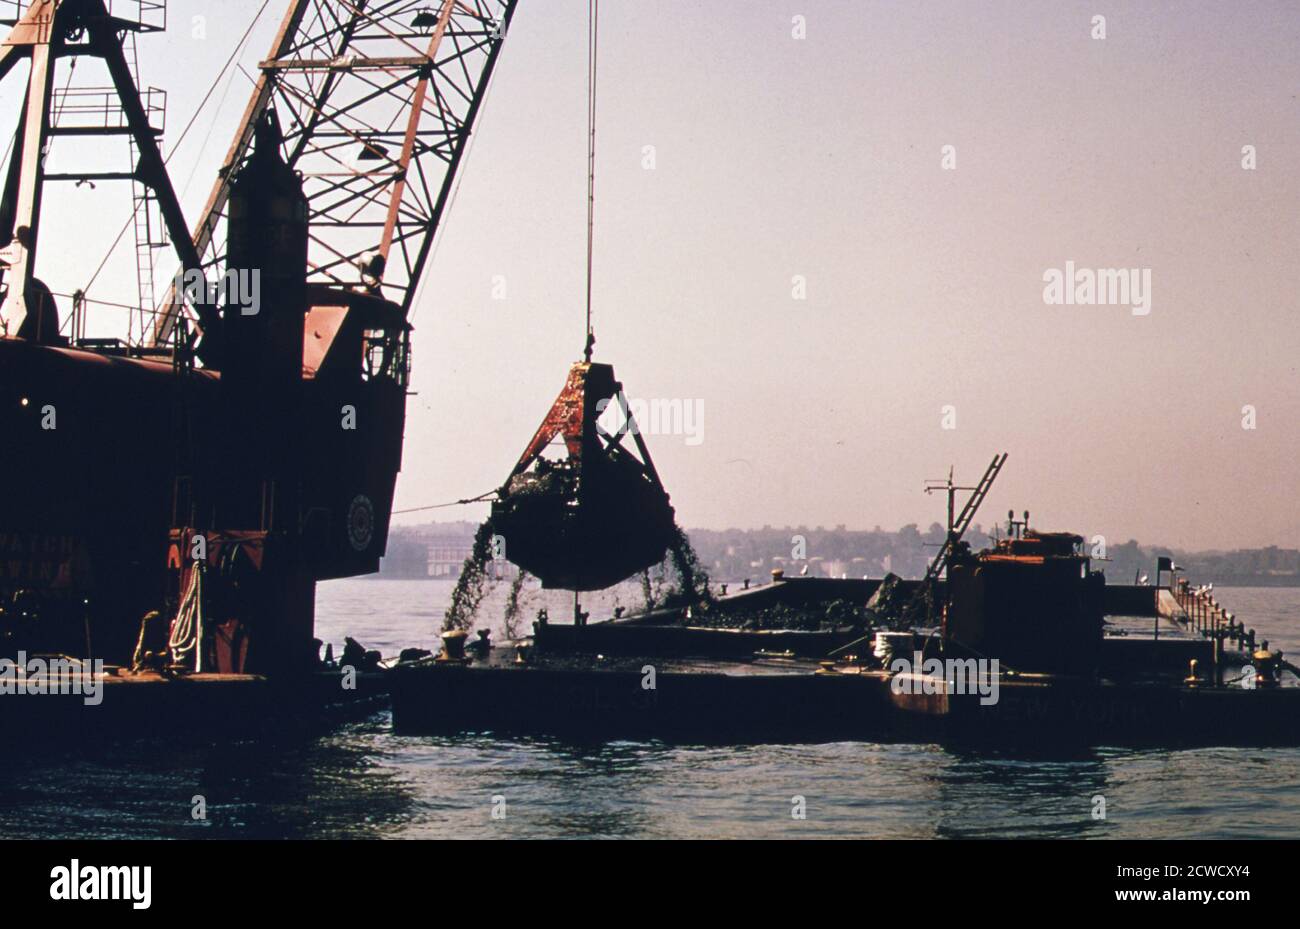 The U.S. Army Corps of Engineers dredging in the New York Harbor for spoils that will be dumped in the New York bight ca.  July 1974 Stock Photo